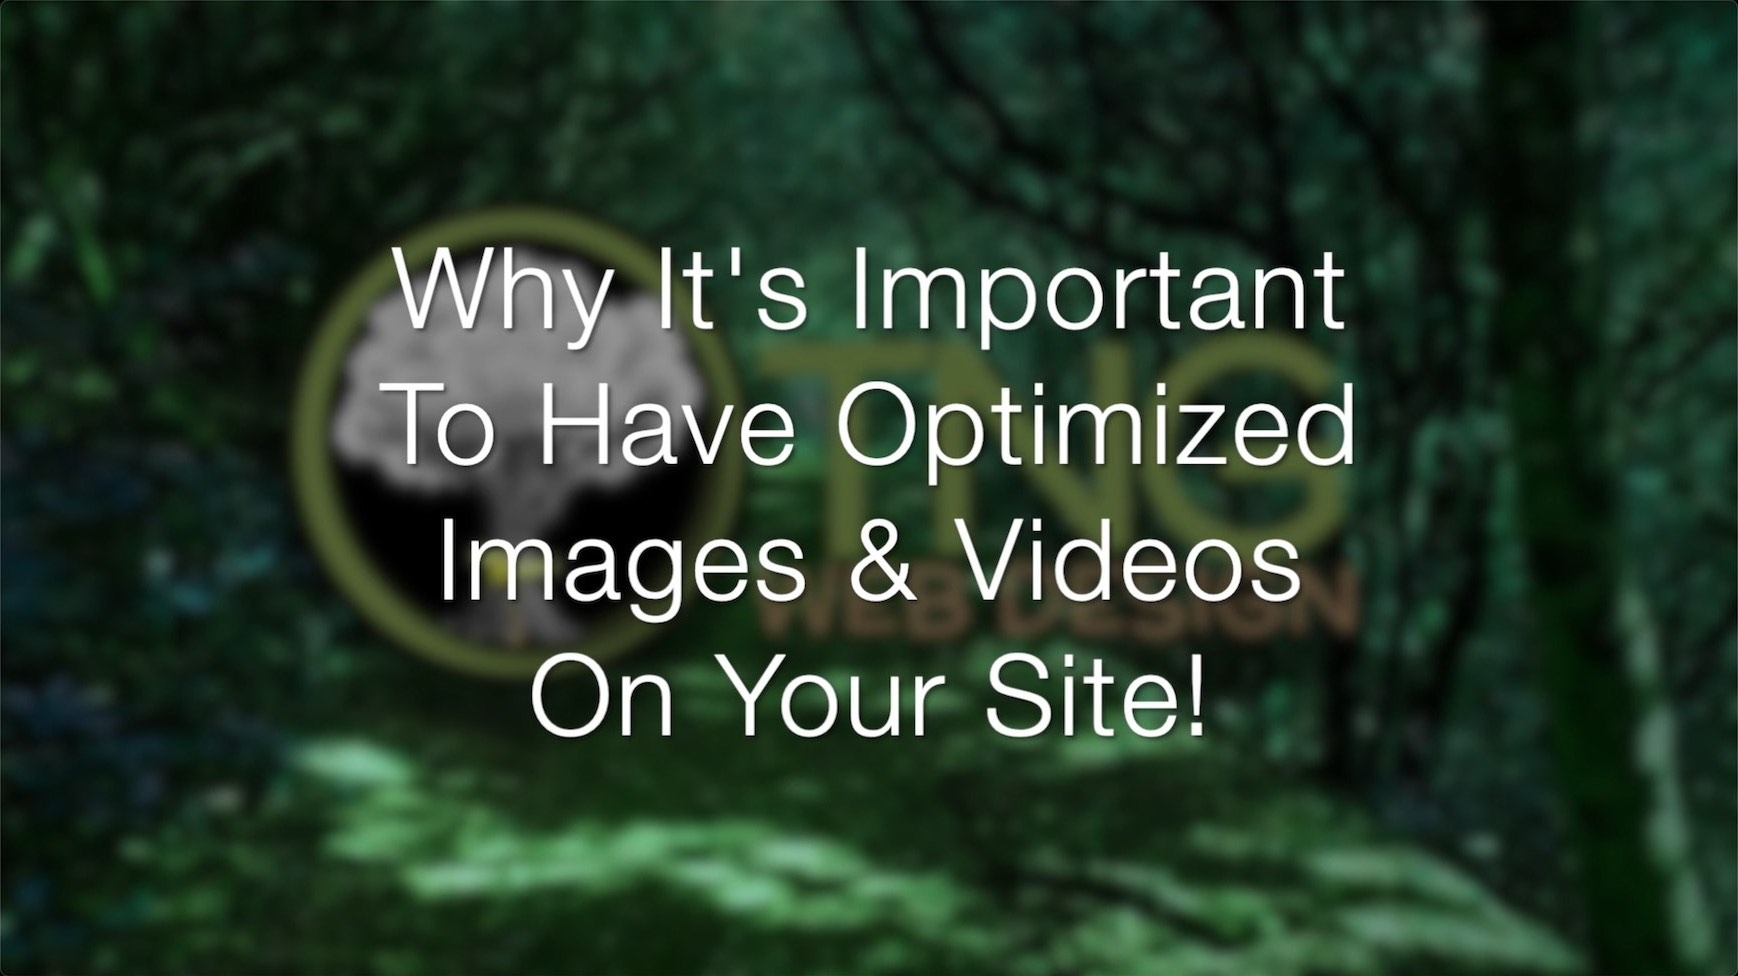 Featured image for “Why It’s Important To Have Optimized Images & Videos On Your Site”